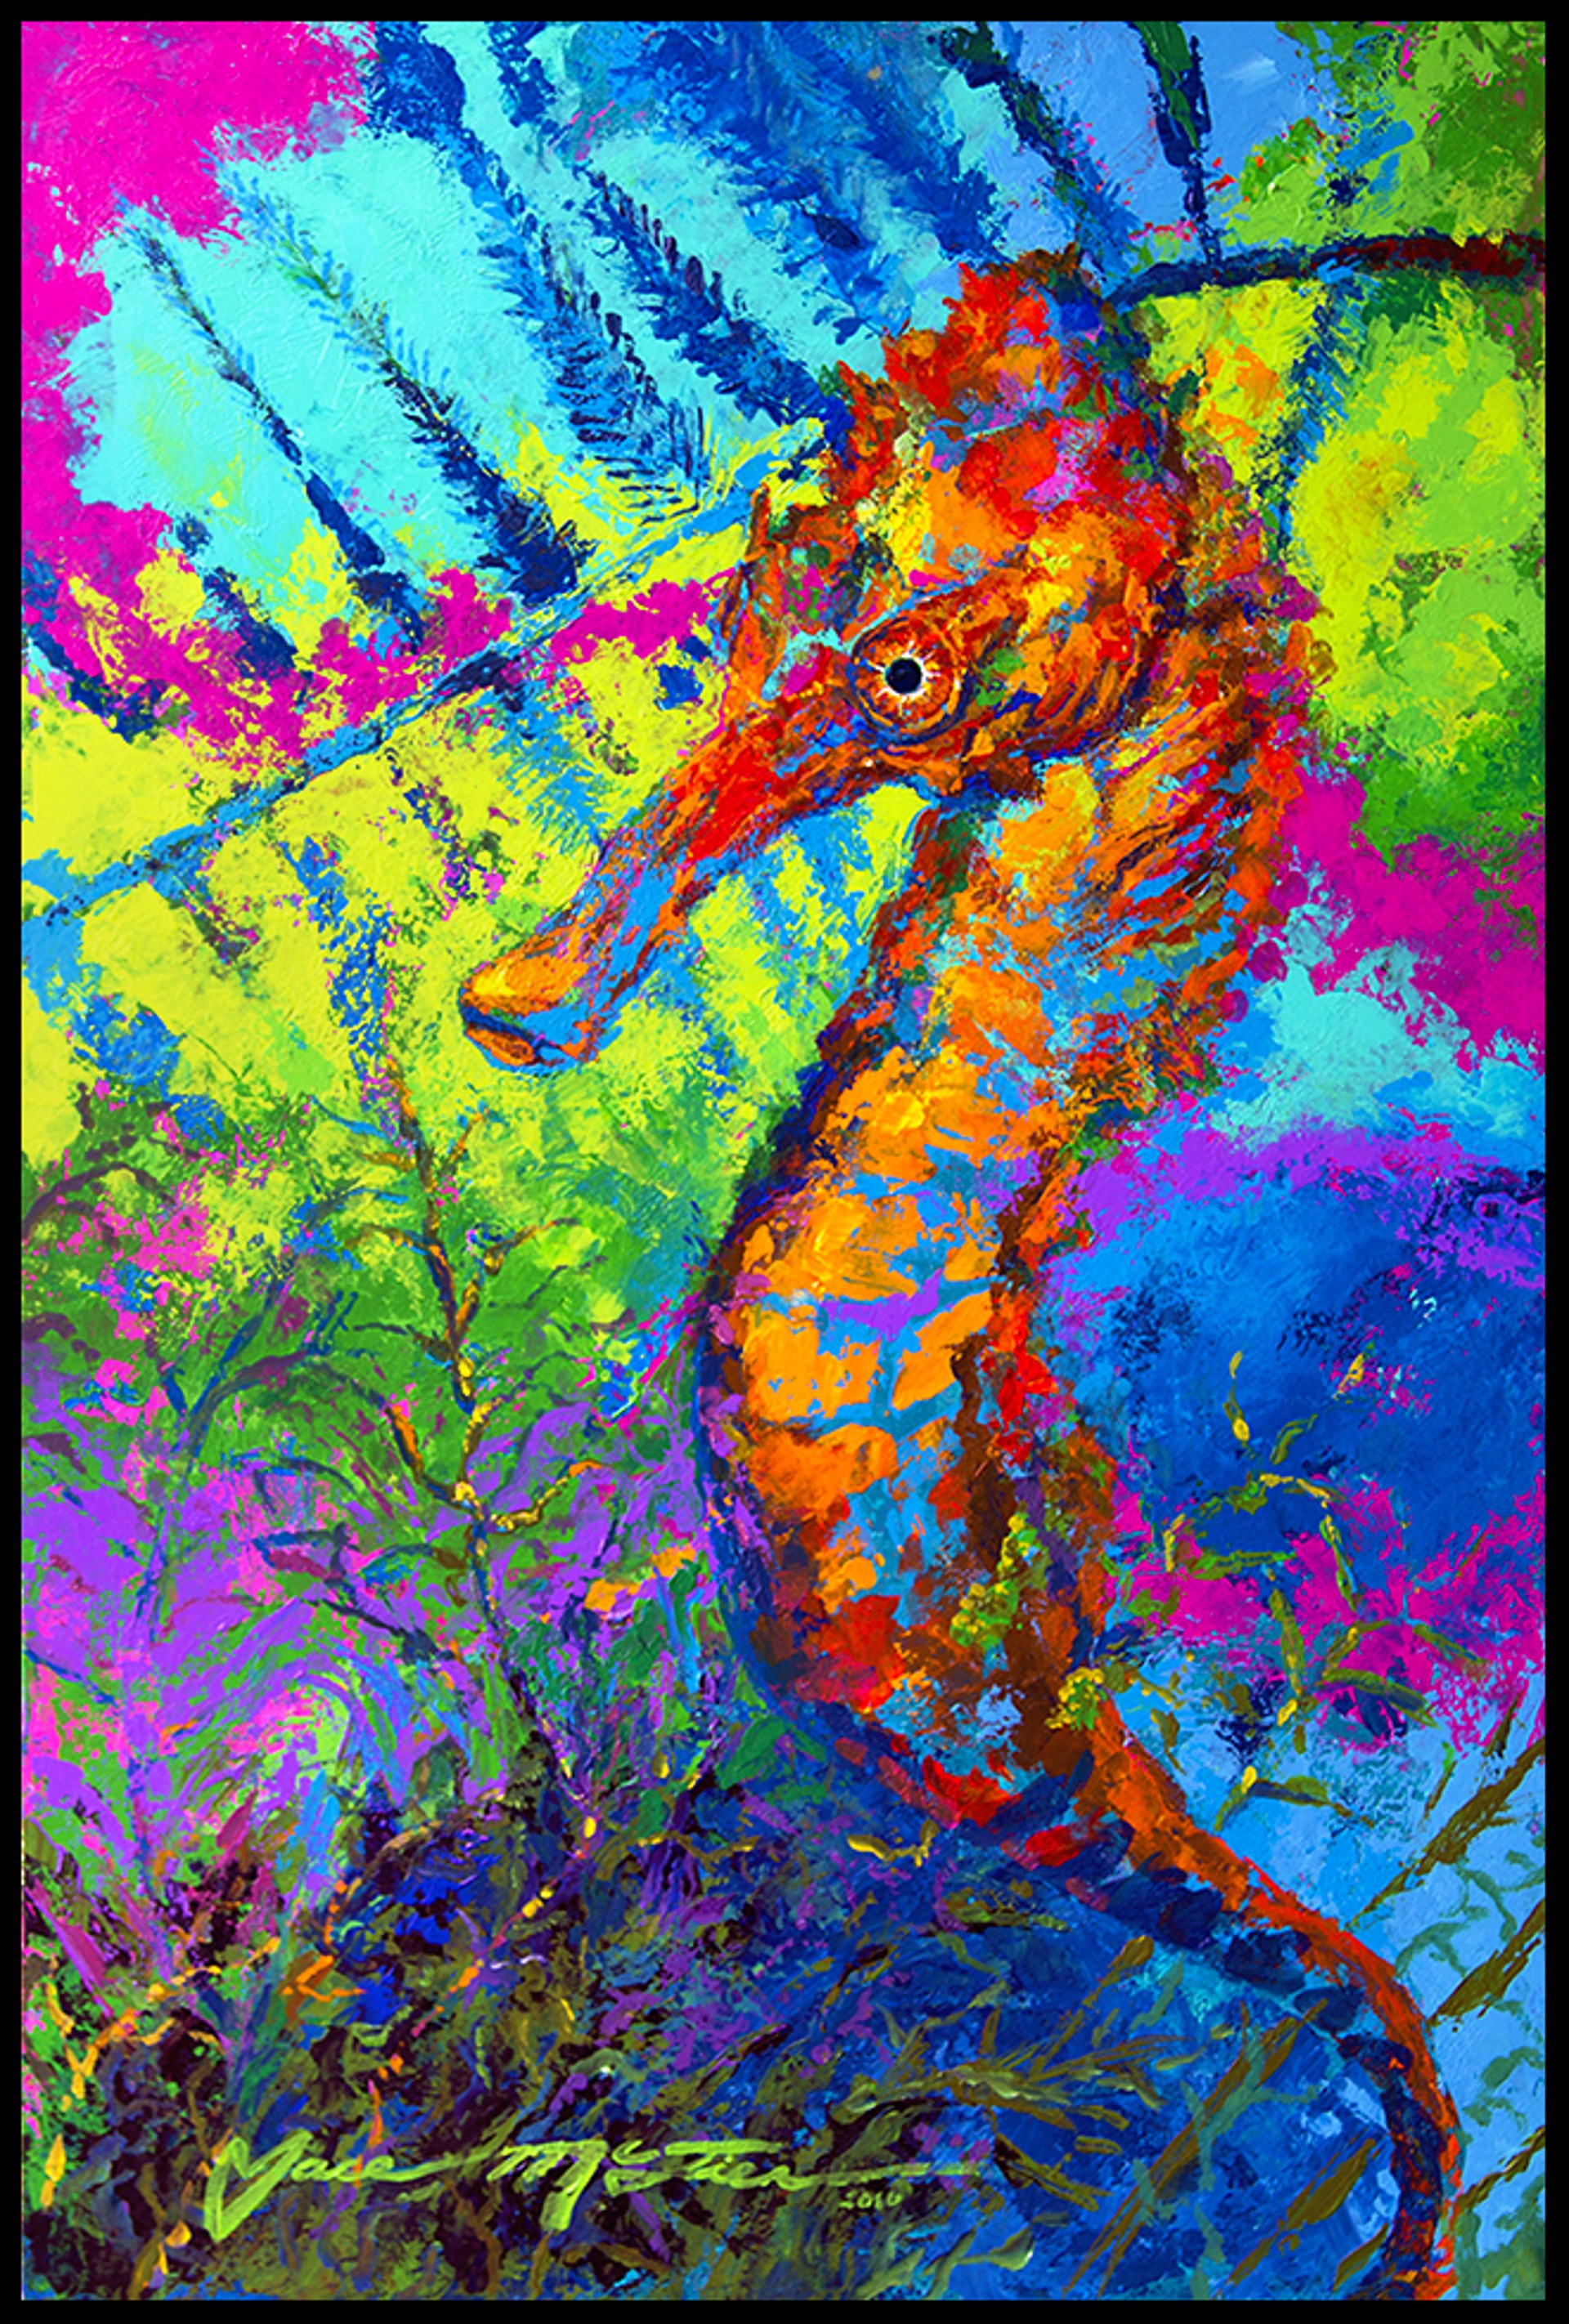 "The Ocean's Ember: Sea Horse in Orange" by Jace McTier